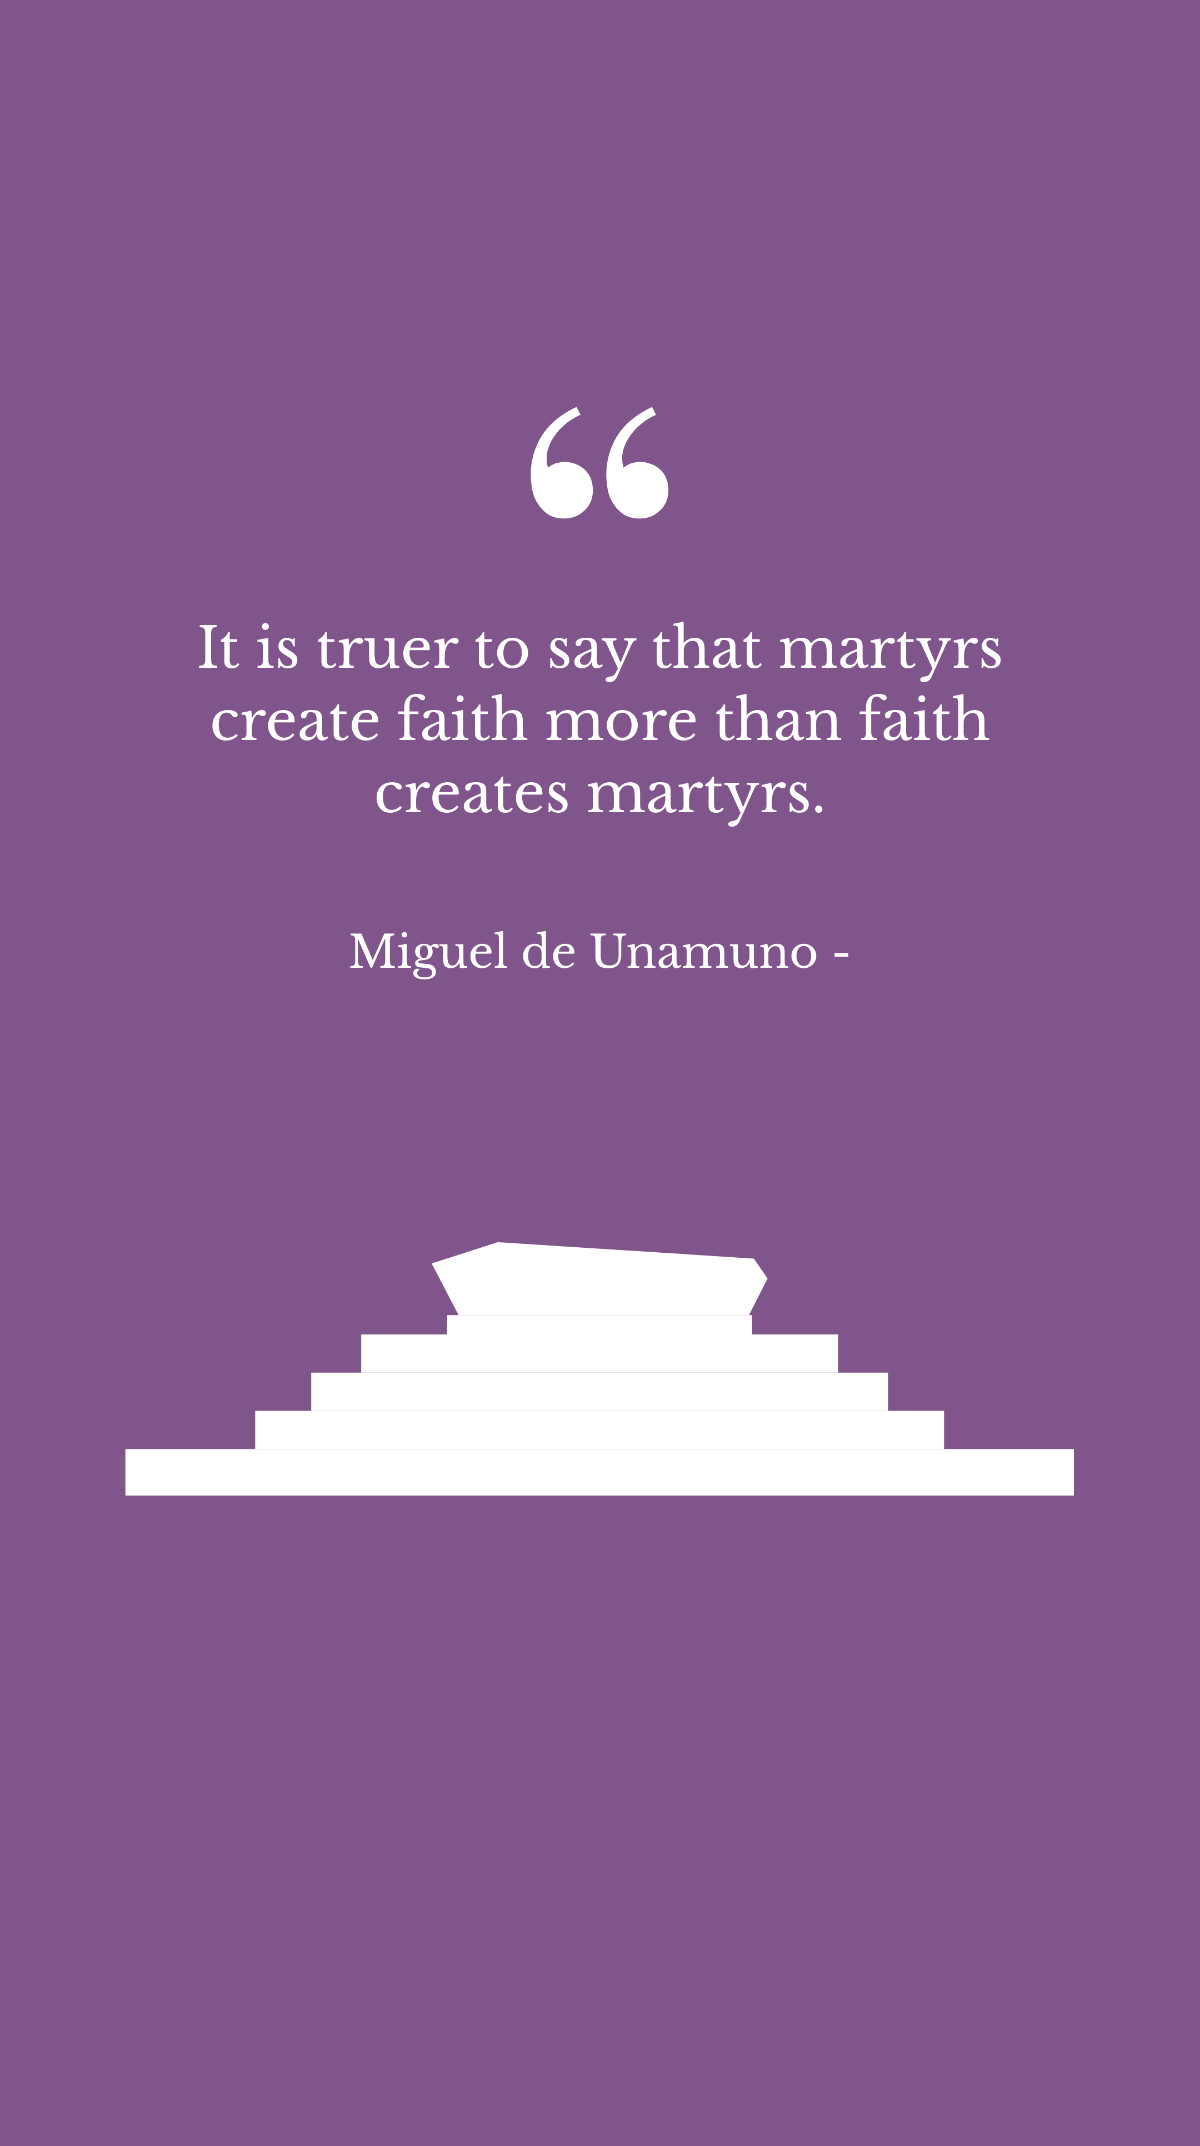 Miguel de Unamuno - It is truer to say that martyrs create faith more than faith creates martyrs.